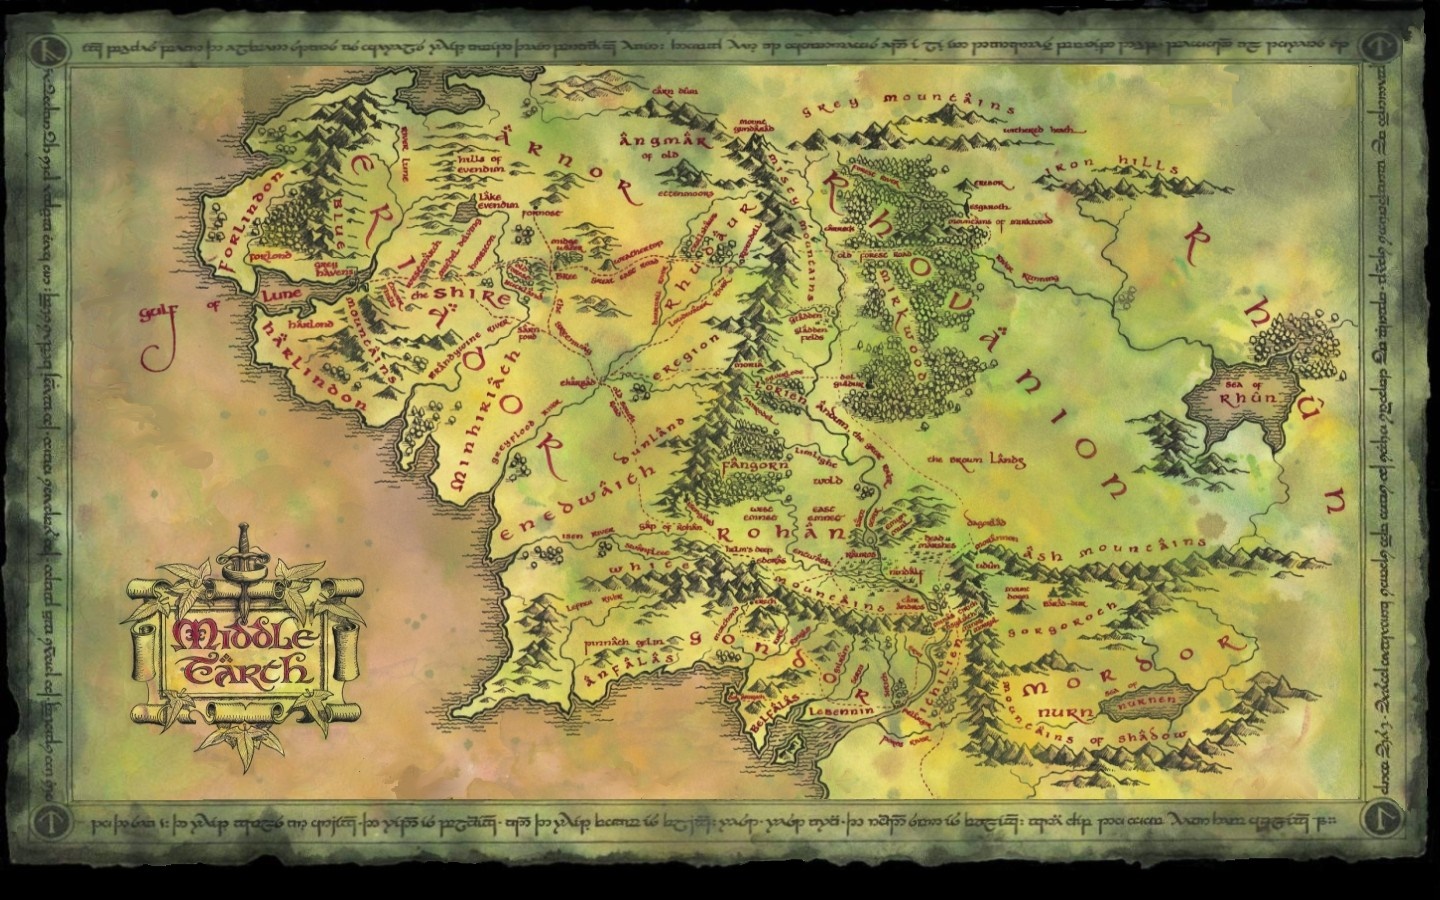 map, The Lord of the Rings, Middle earth, Terrain, ancient history Gallery HD Wallpaper